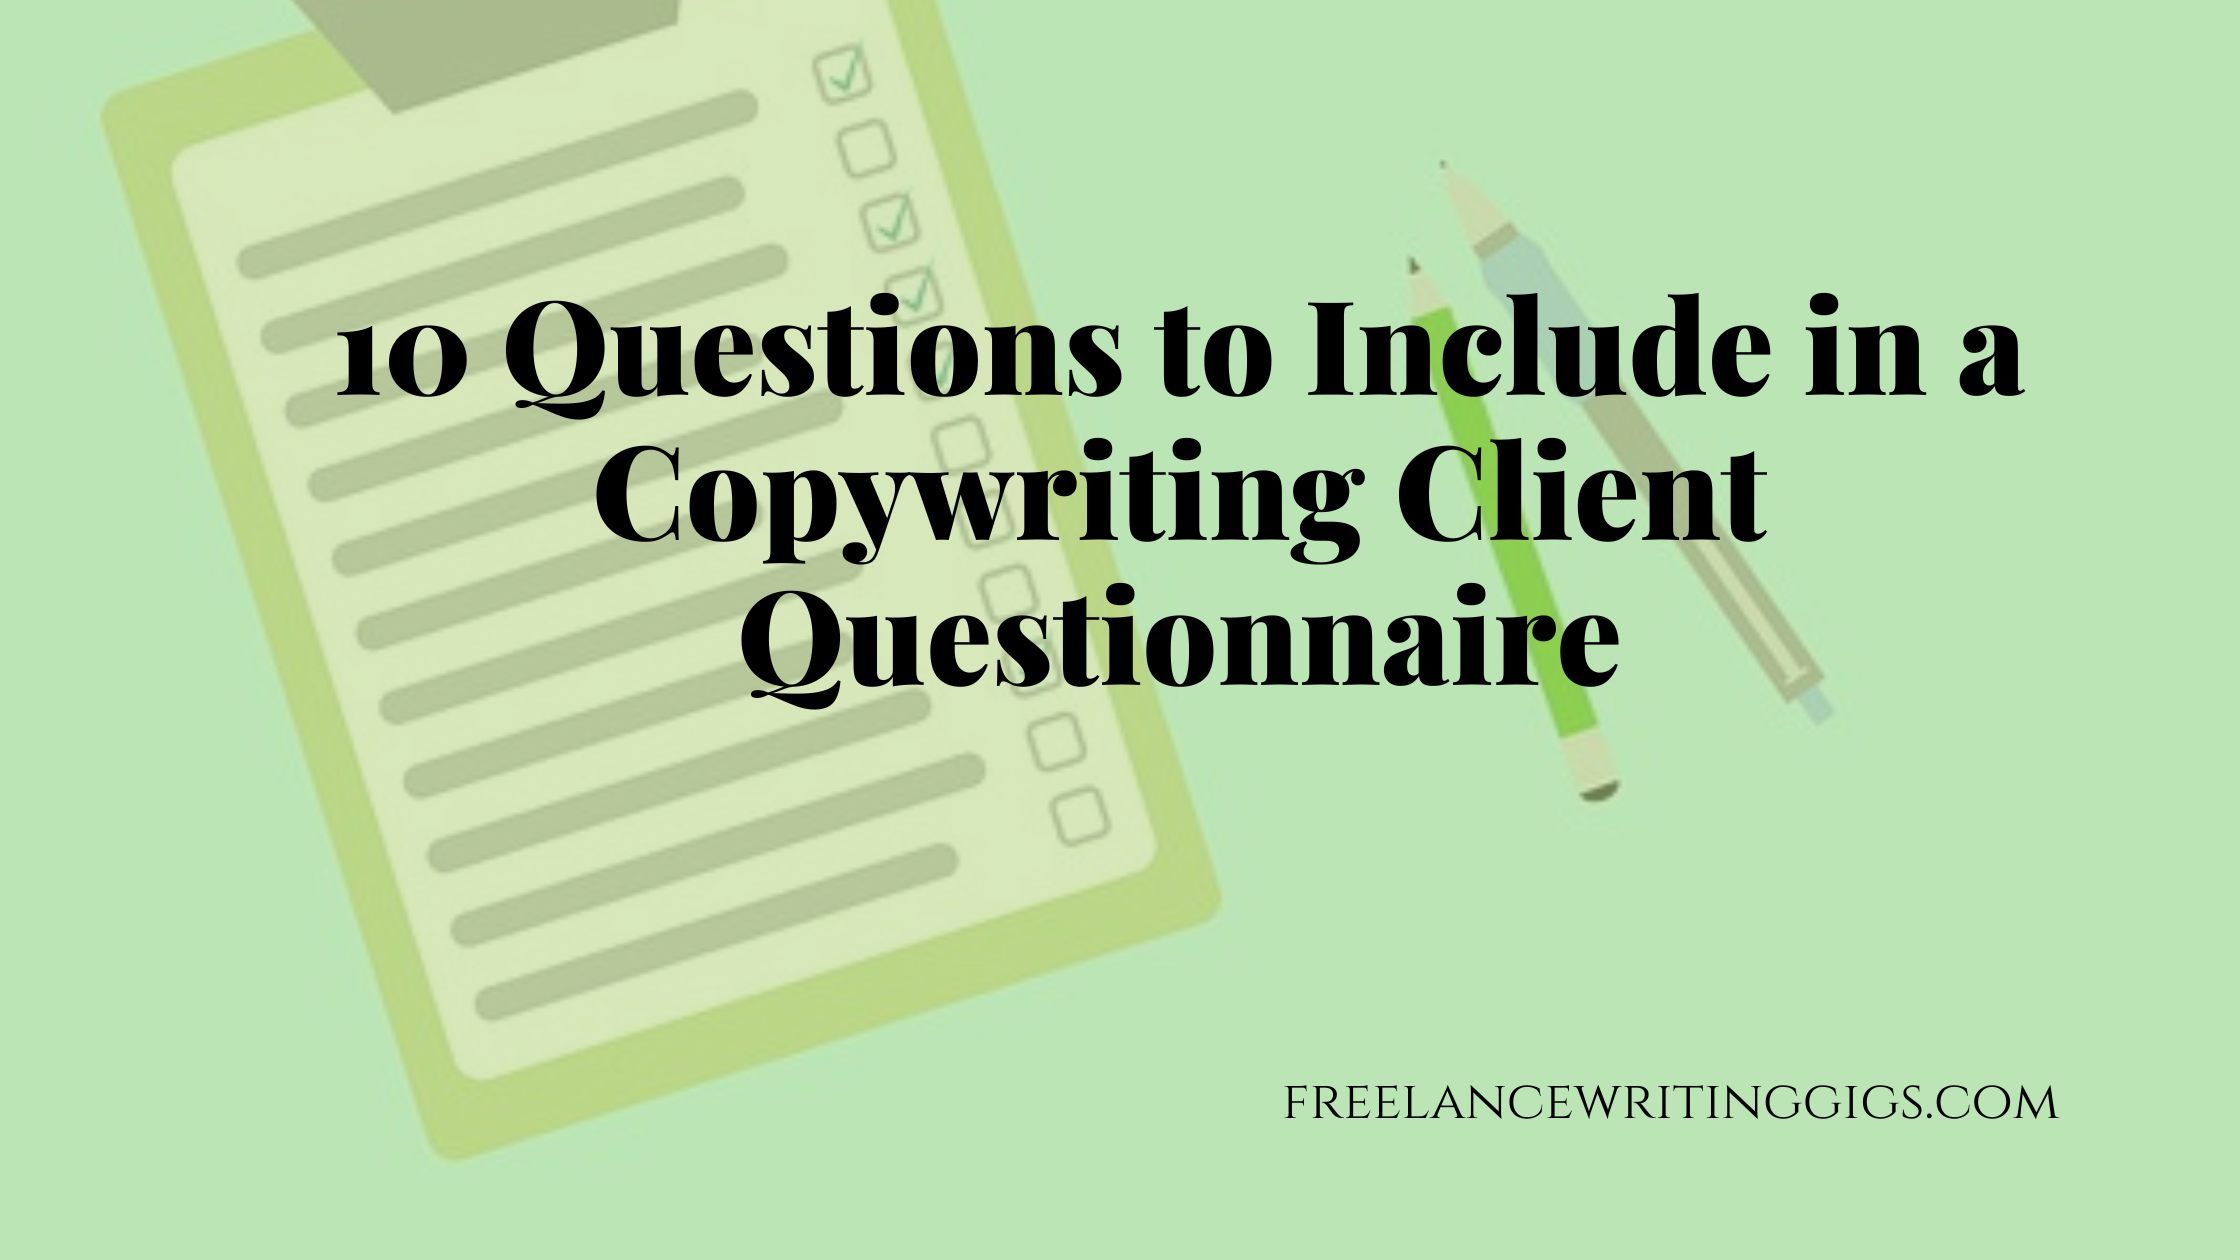 10 Questions to Include in a Copywriting Client Questionnaire